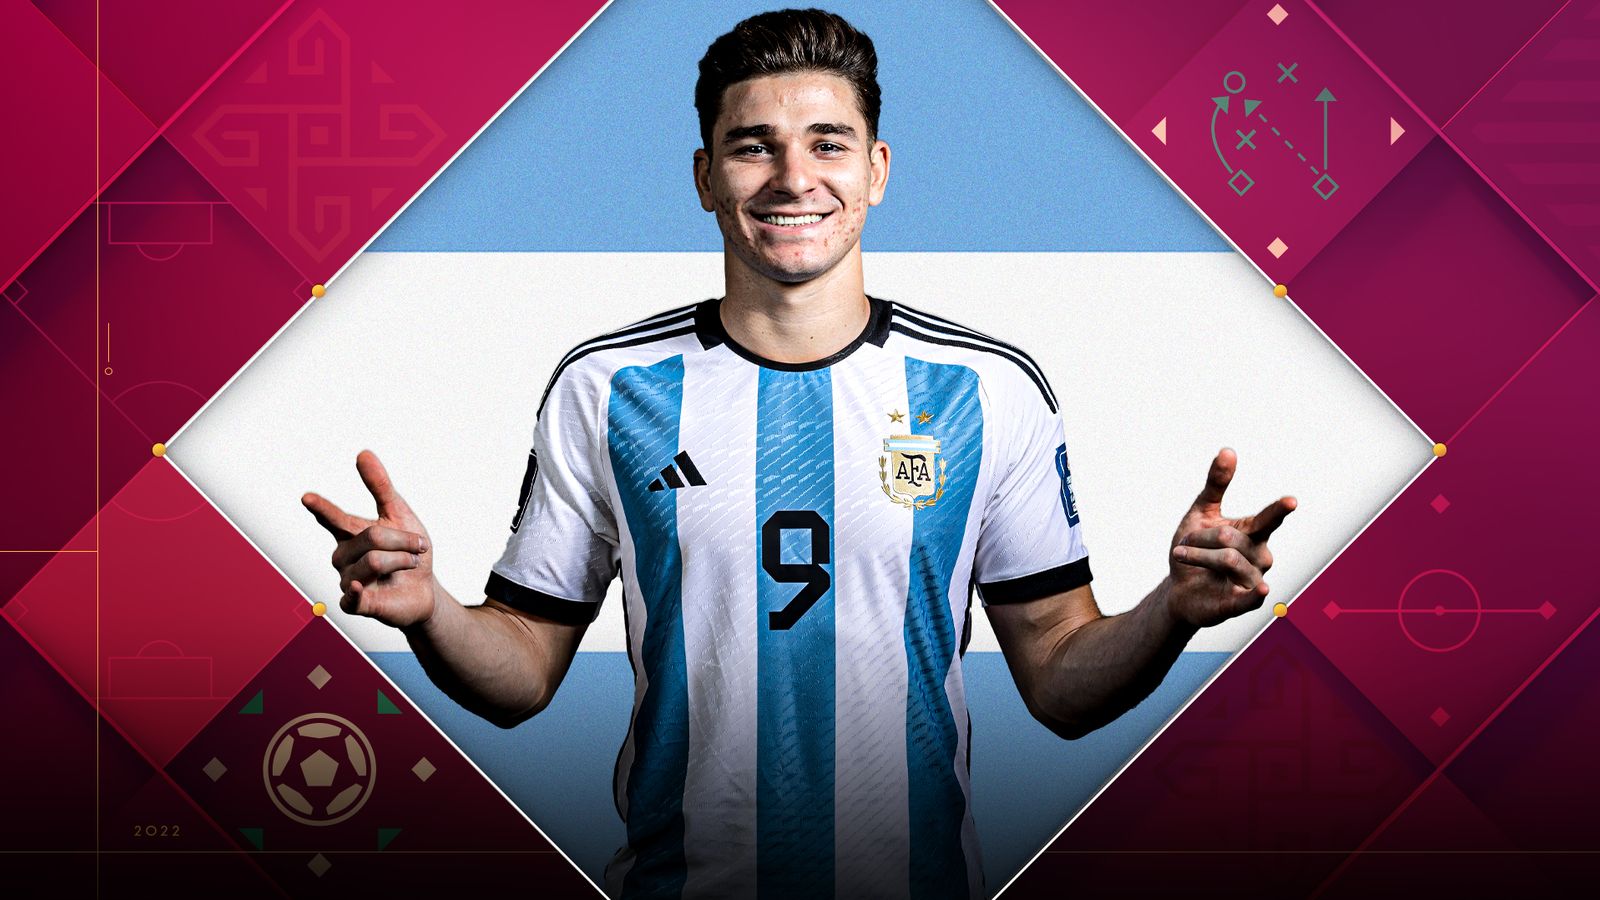 Julian Alvarez’s perfect partnership with Lionel Messi has been key to Argentina’s success in reaching the World Cup final